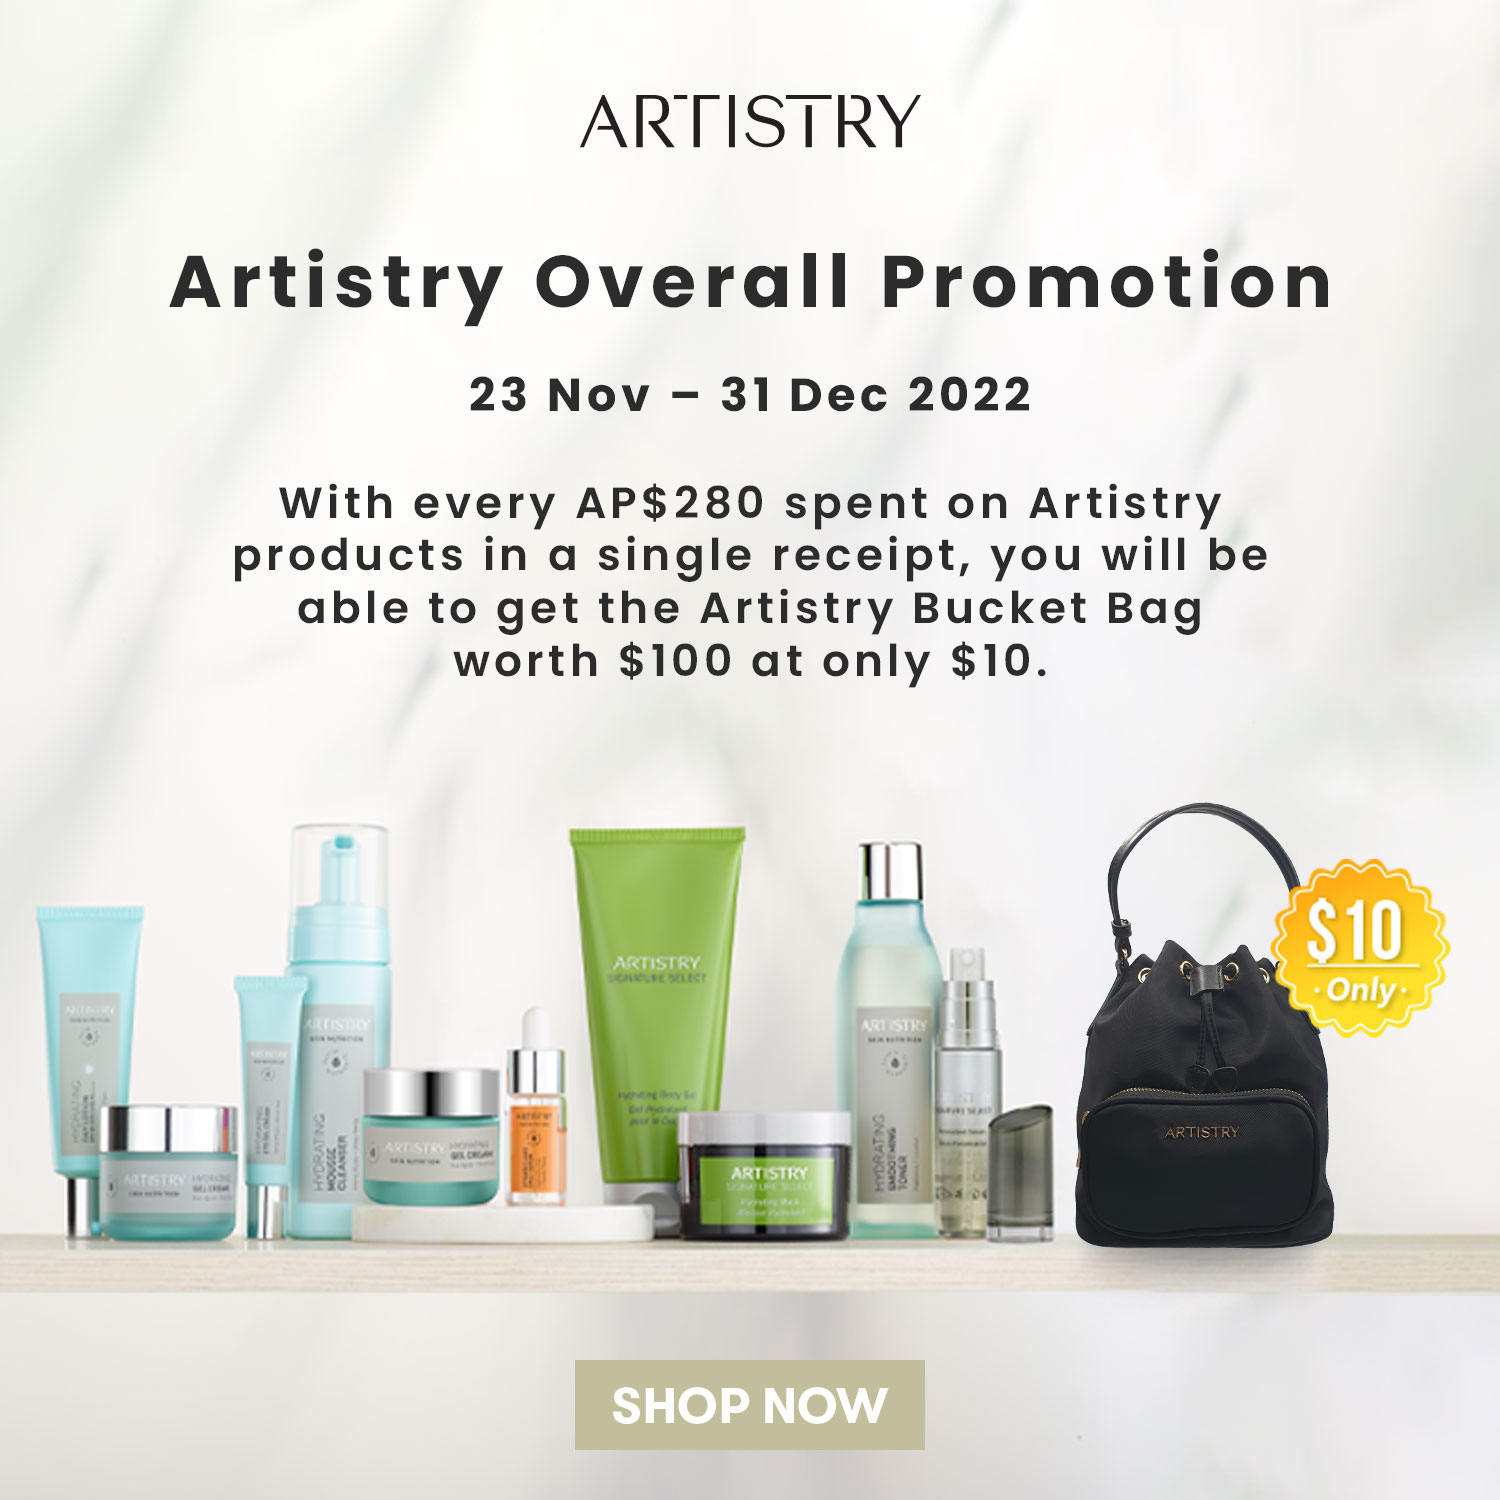 Artistry Overall Promo 2022